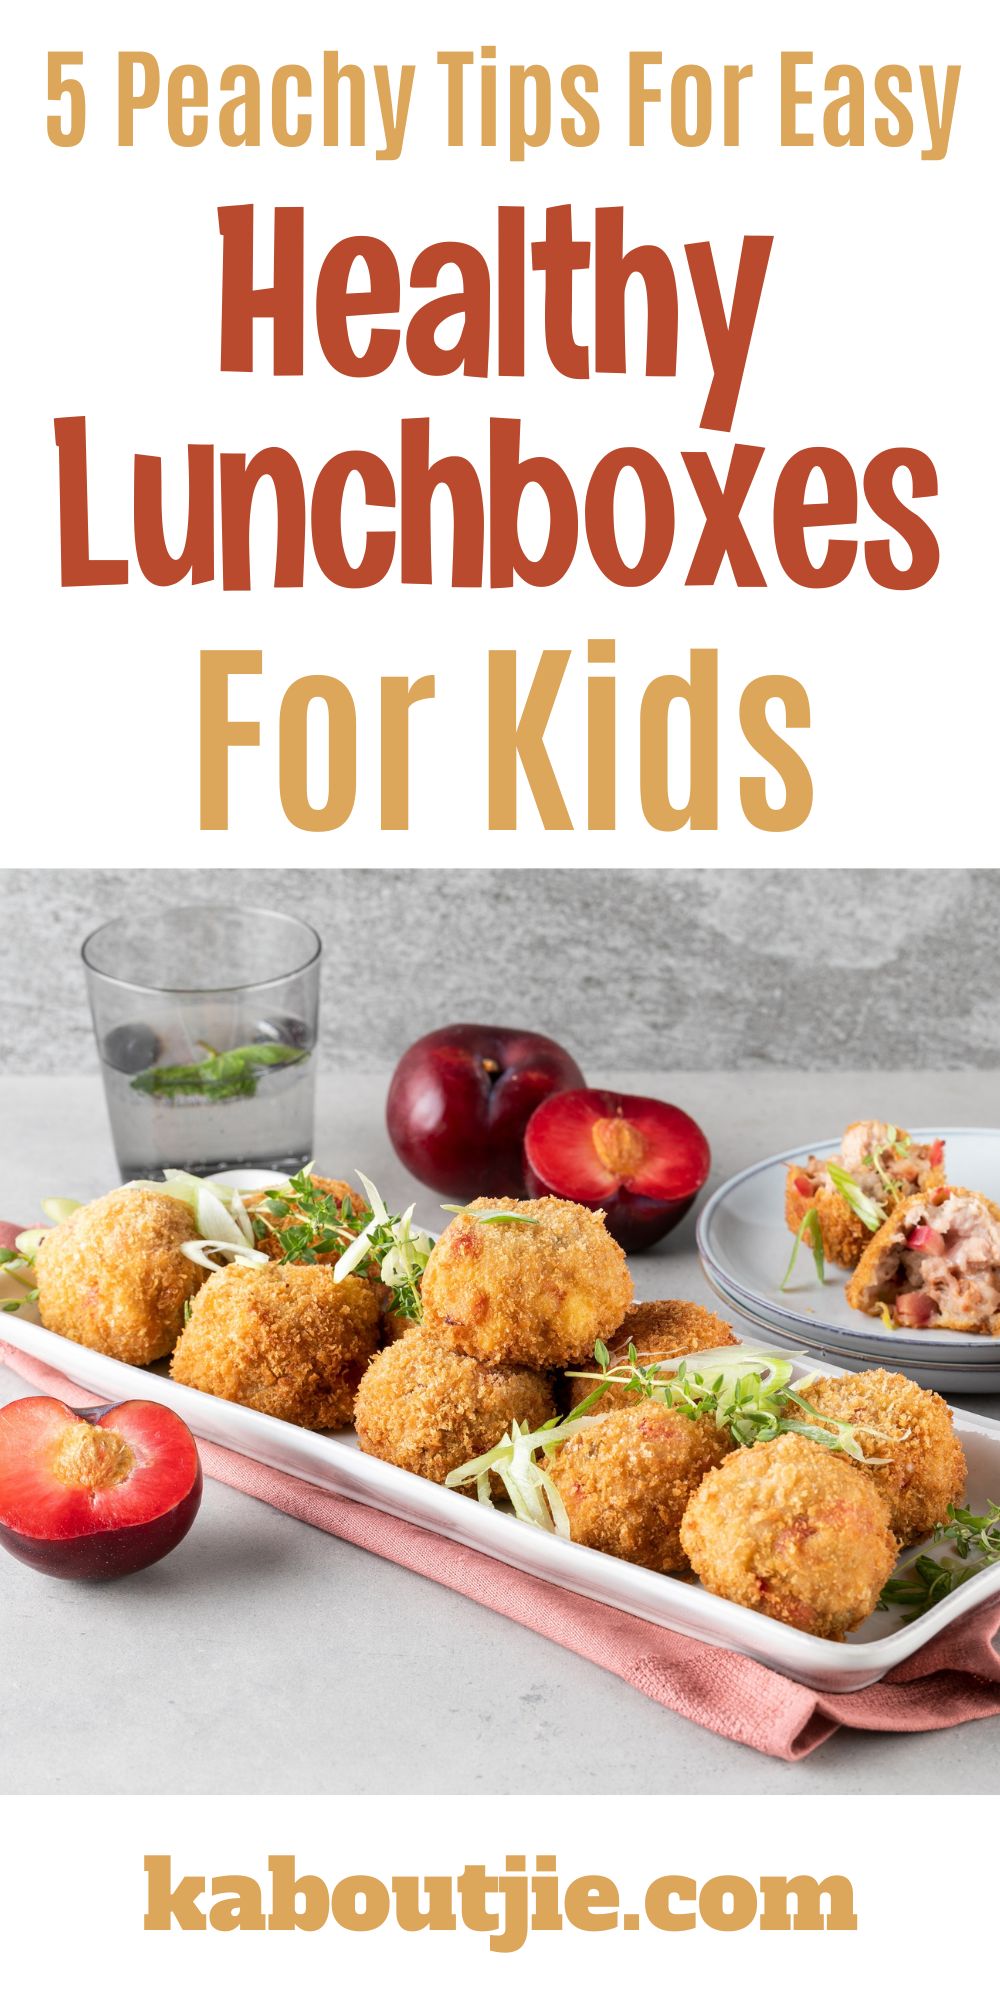 Easy Healthy Lunchboxes